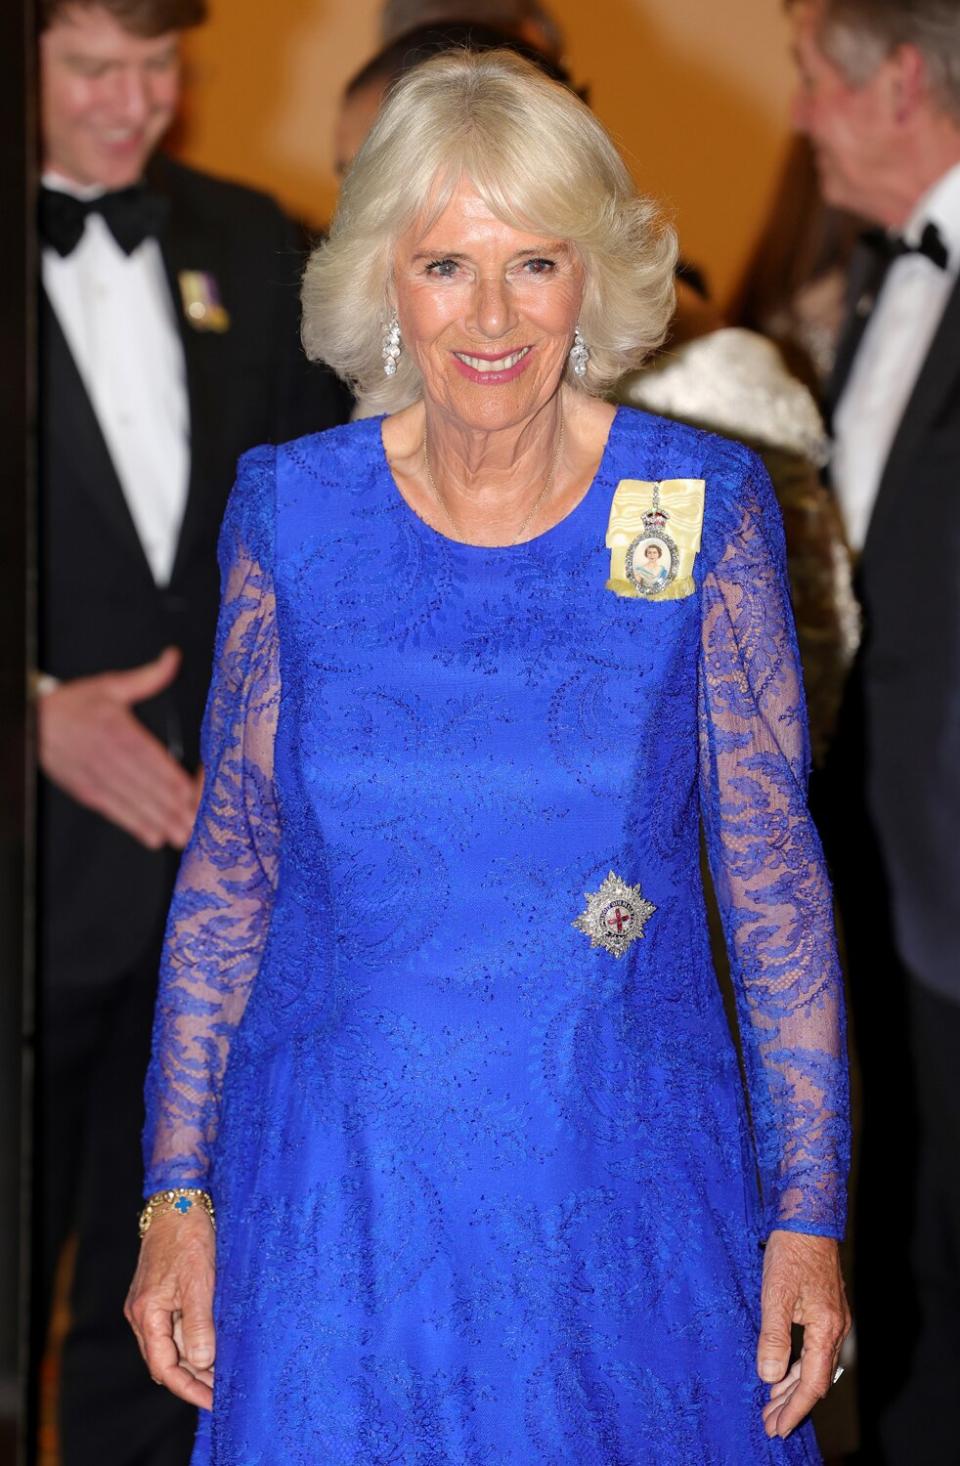 Camilla, Duchess of Cornwall arrives at the Commonwealth Heads of Government Dinner at the Marriott Hotel on June 24, 2022 in Kigali, Rwanda. Prince Charles, The Prince of Wales has attended five of the 24 Commonwealth Heads of Government Meeting meetings held since 1971: Edinburgh in 1997, Uganda in 2007, Sri Lanka in 2013 (representing The Queen), Malta in 2015 and the UK in 2018. It was during the UK CHOGM that it was formally announced that The Prince would succeed The Queen as Head of the Commonwealth. Leaders of Commonwealth countries meet every two years for the meeting which is hosted by a different member country on a rotating basis.